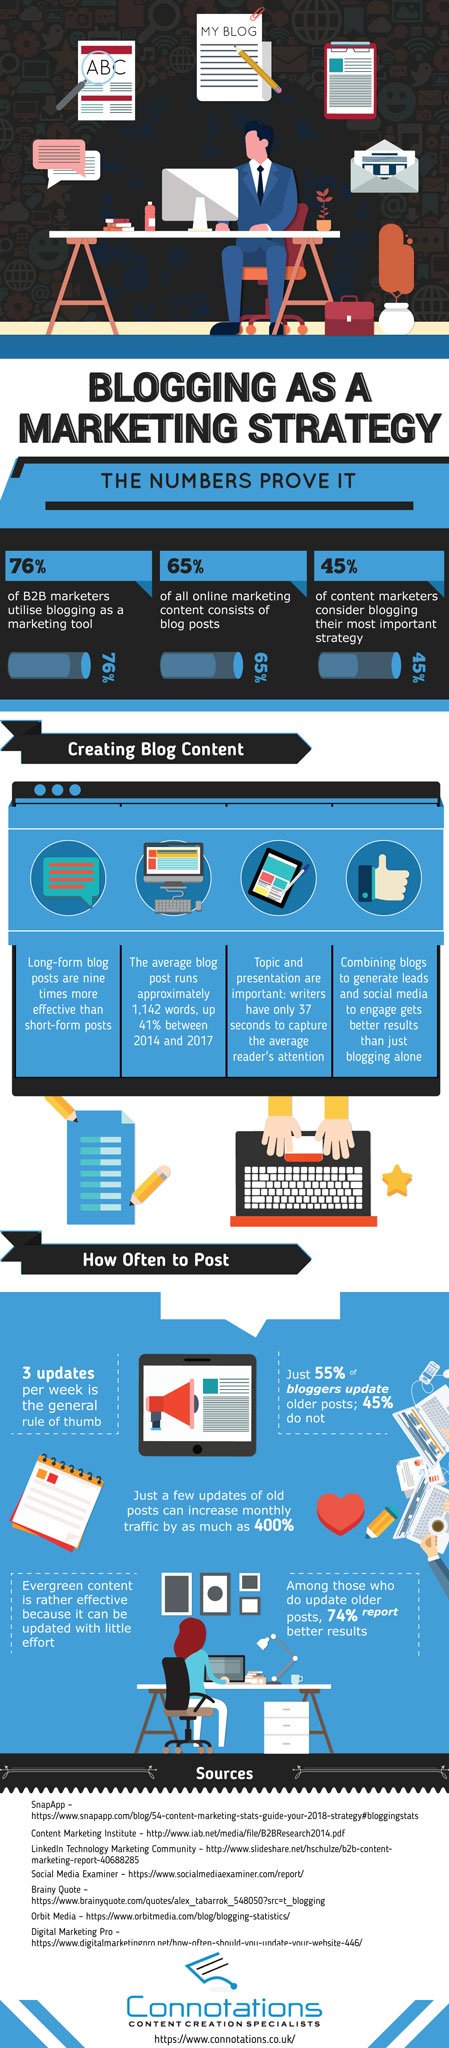 Blogging: An Effective Marketing Strategy [Infographic]